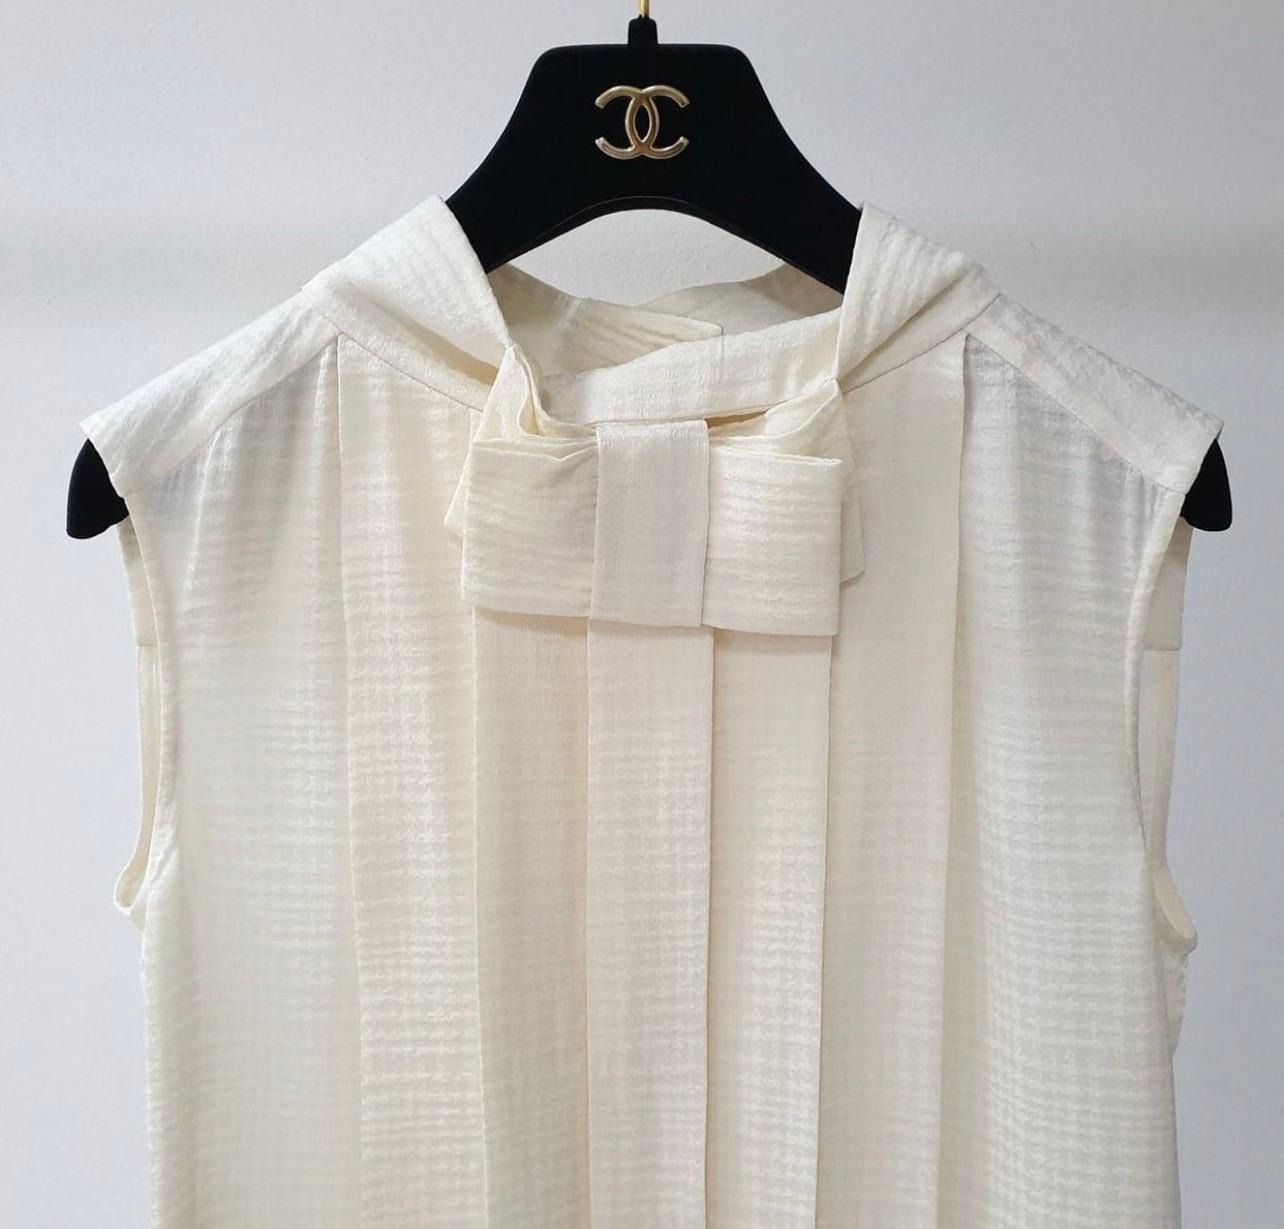 Chanel Ivory Sleeveless Pleated Silk top w/ Bow Detail & Globe buttons
Chanel Ivory Pleated Silk top w/ Bow Detail & Globe buttons 
Sz- 42 
 It has long pleats from the collar down the length of the shirt and a flat bow detail on the neck. 
There